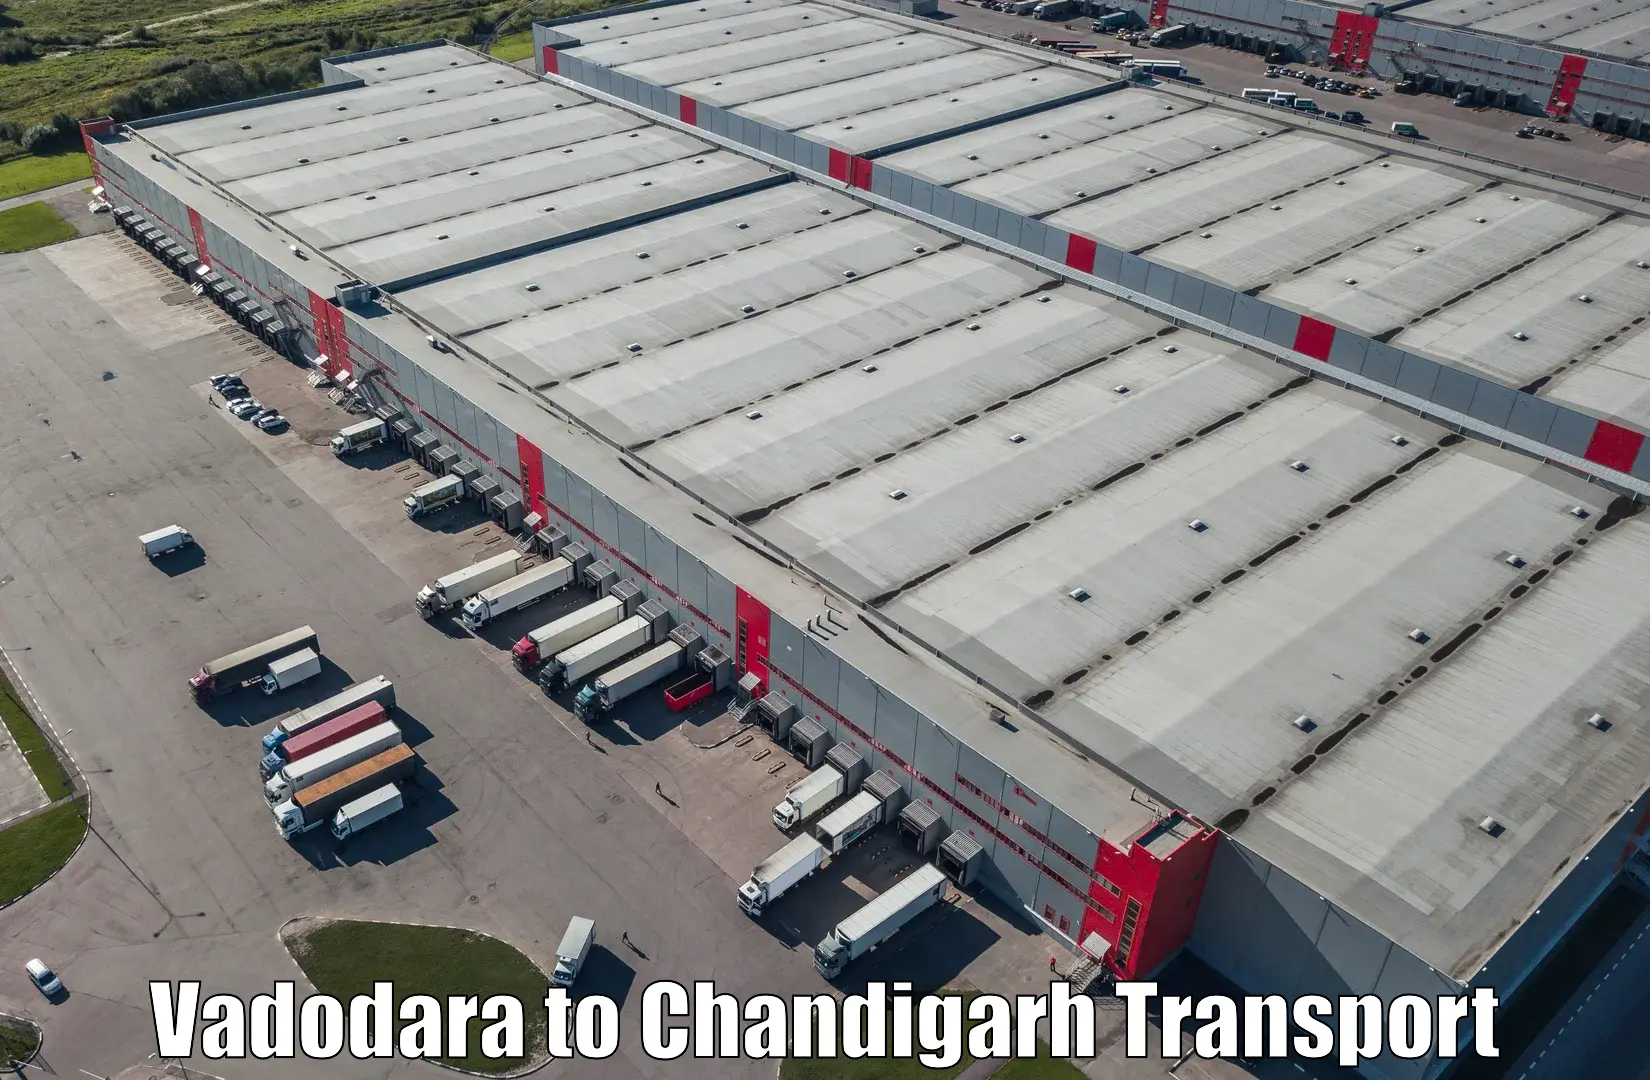 Shipping services in Vadodara to Chandigarh